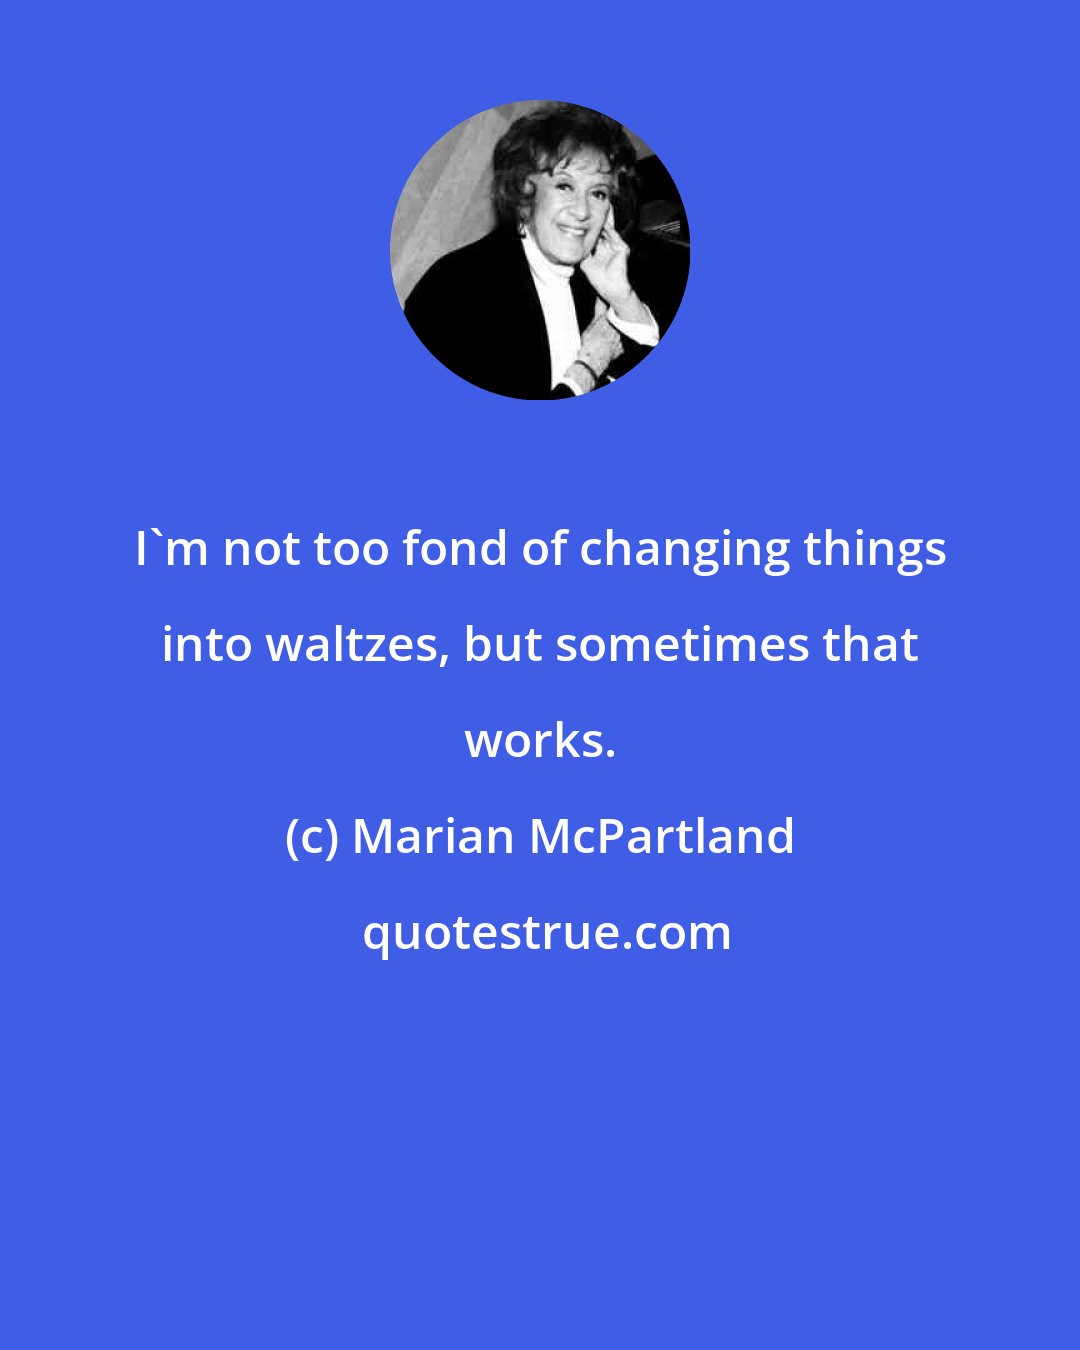 Marian McPartland: I'm not too fond of changing things into waltzes, but sometimes that works.